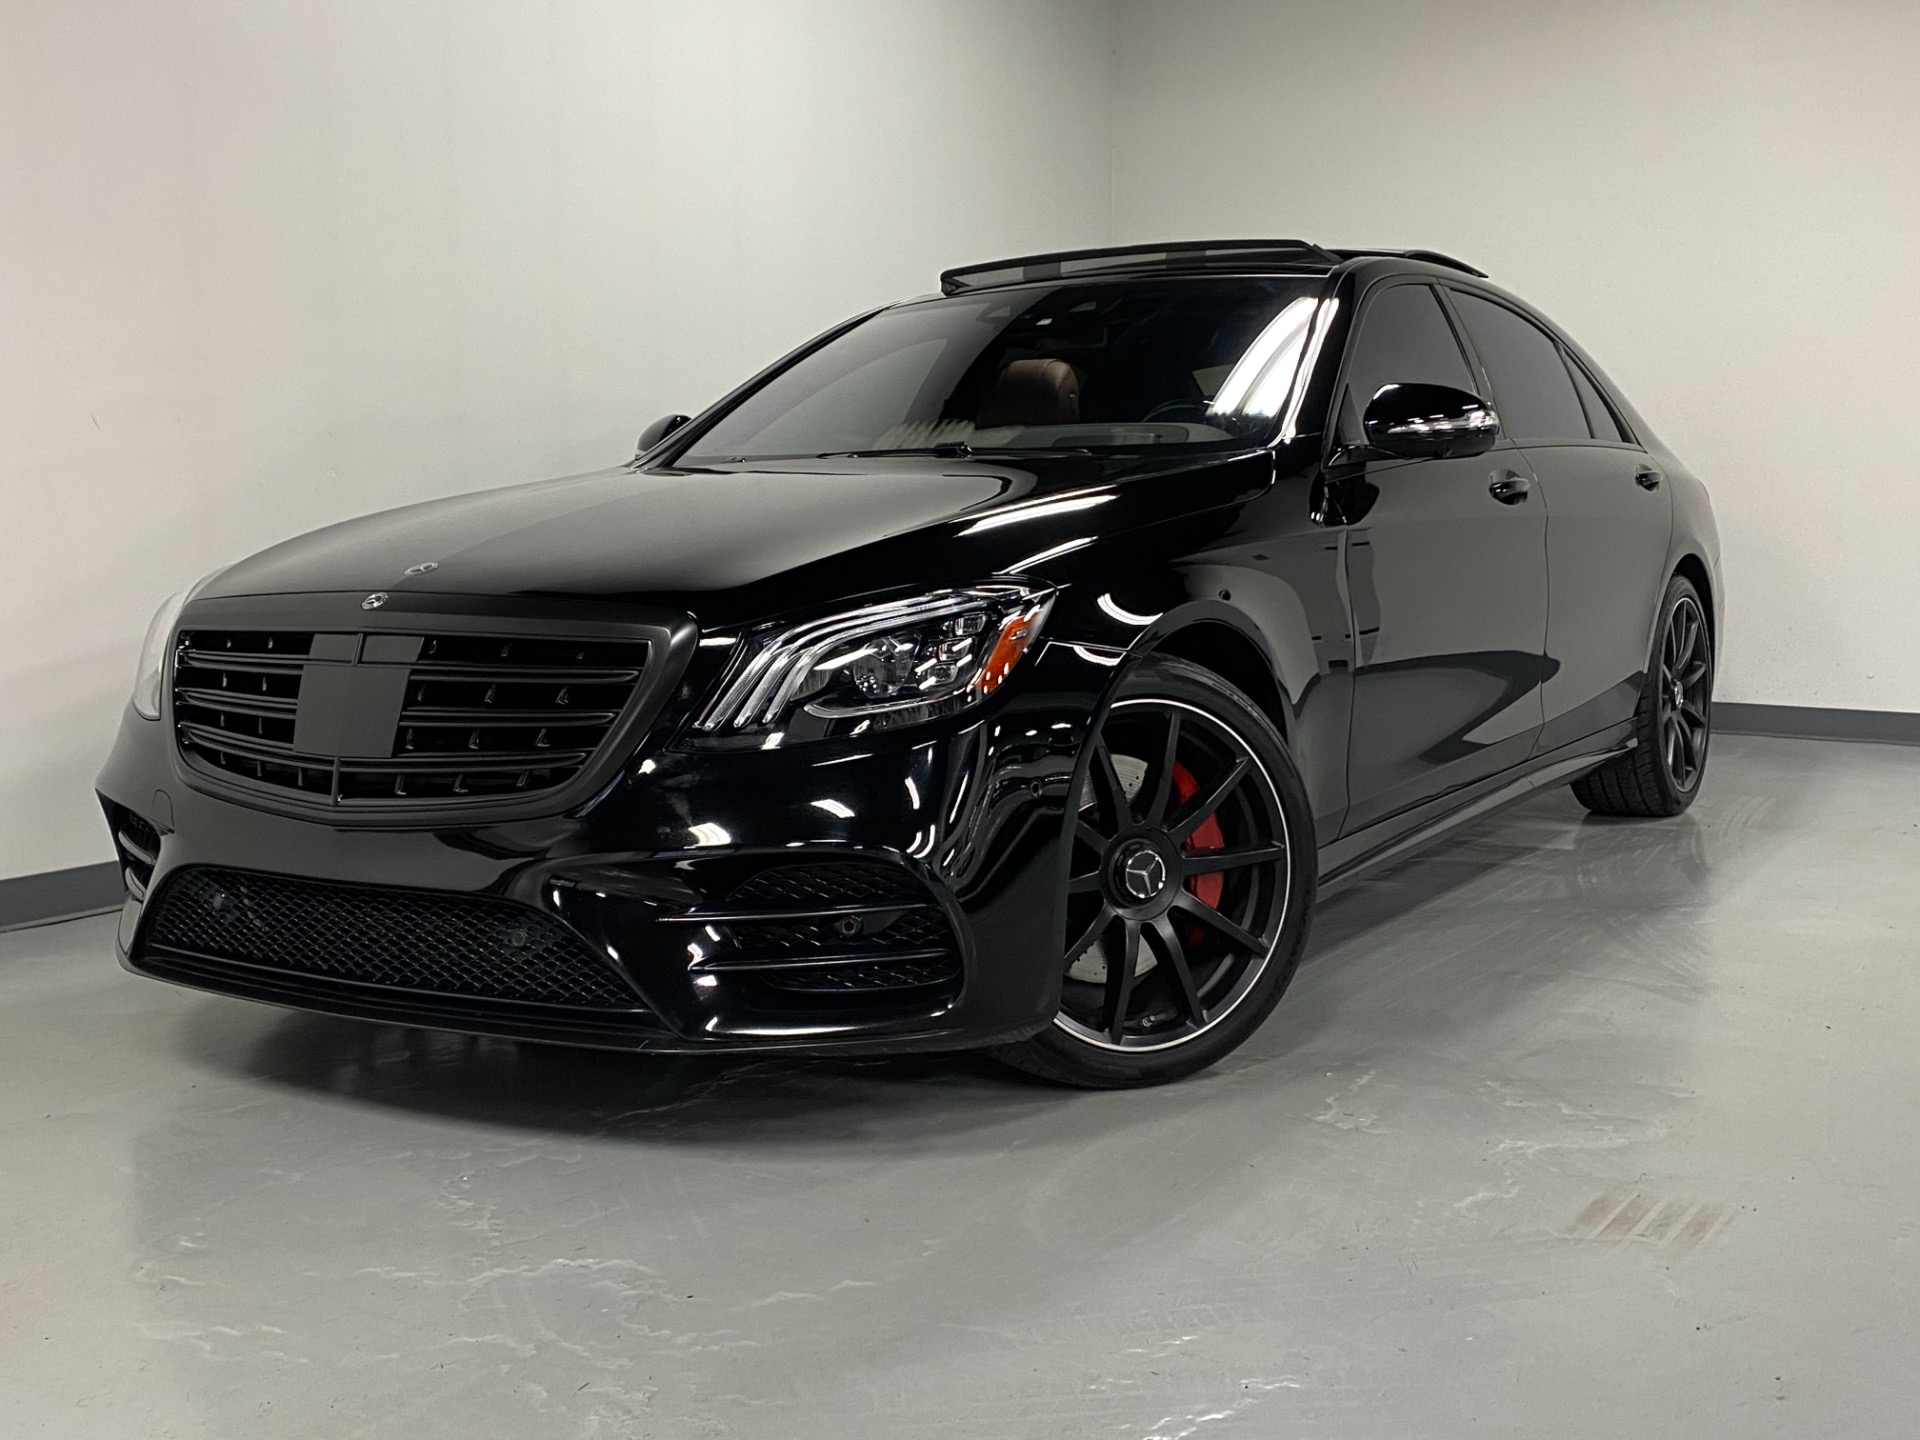 Used 2018 Black Mercedes-Benz S-Class s560 4 MATIC awd S 560 4MATIC For  Sale (Sold) | Prime Motorz Stock #3608